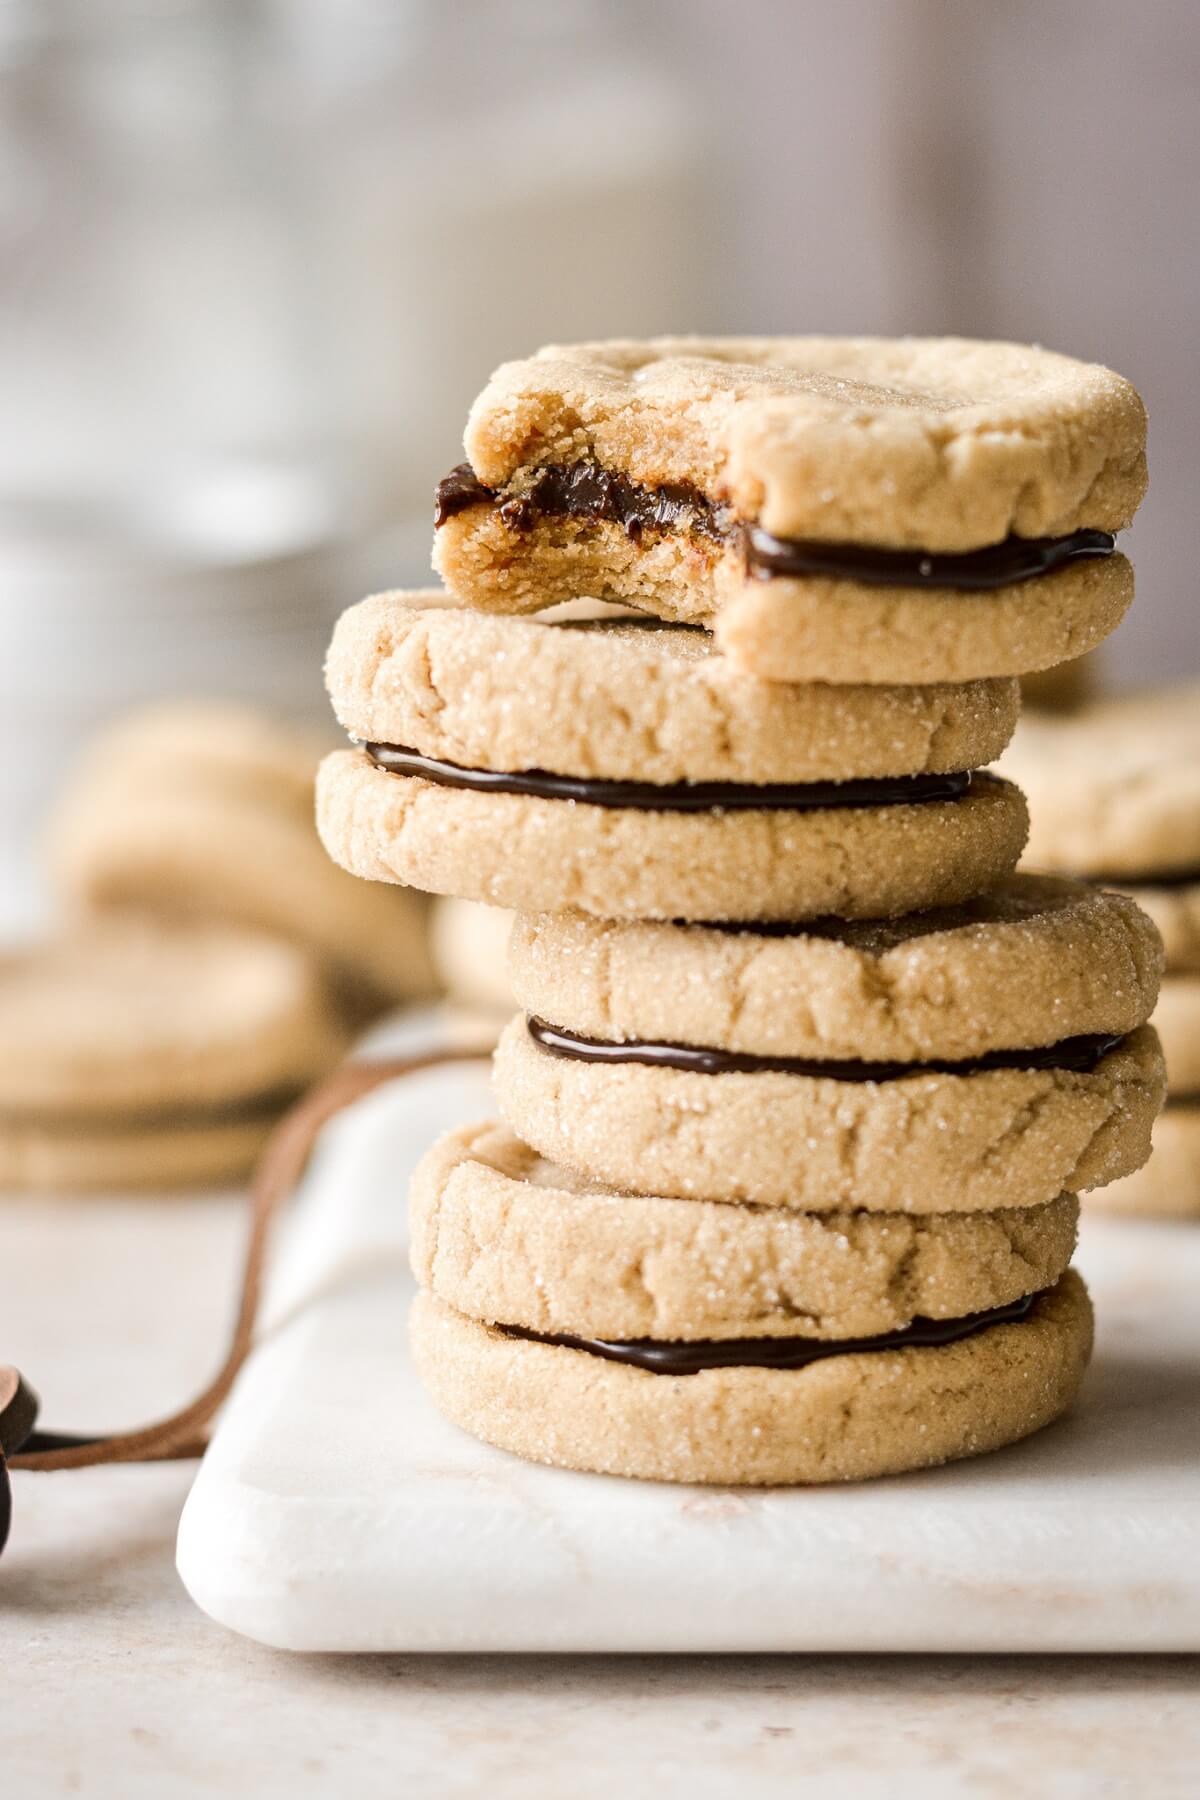 Stack of butterscotch sandwich cookies, one with a bite taken.